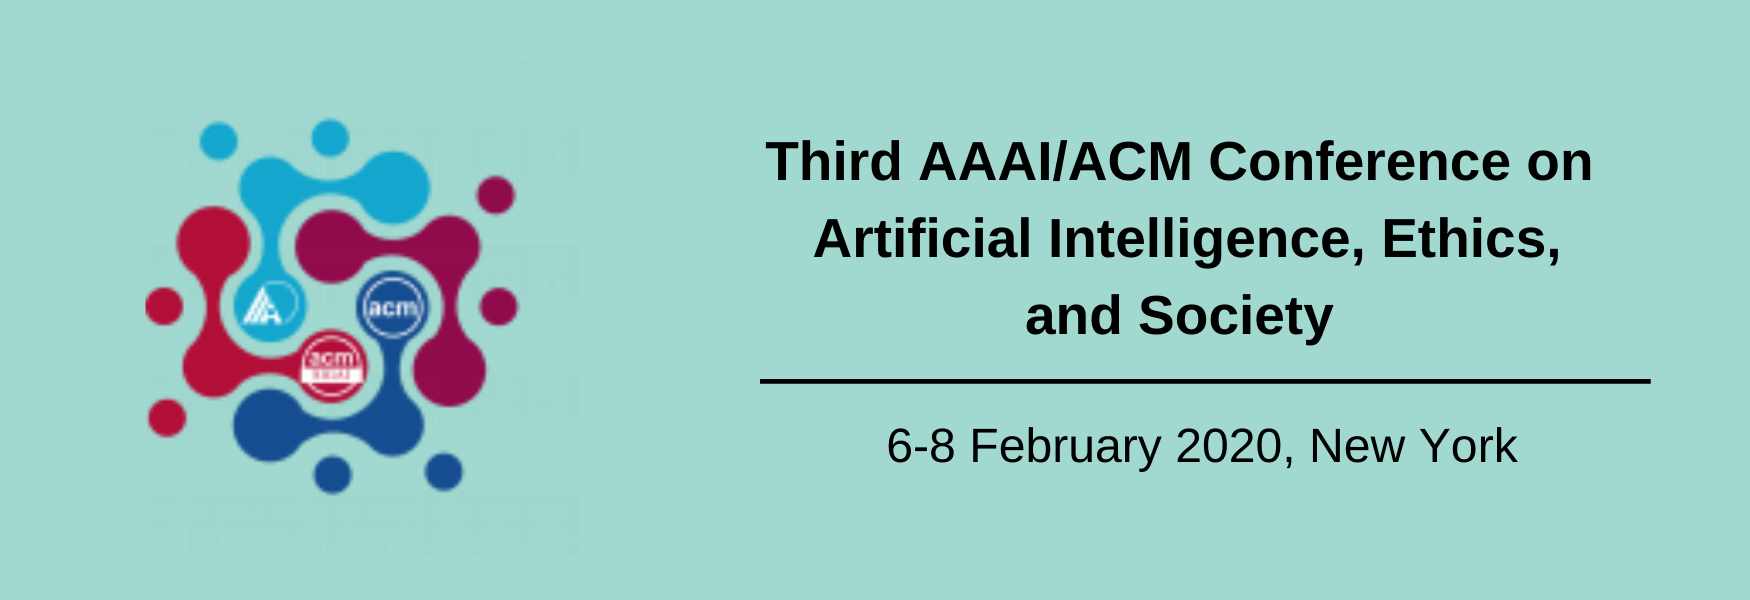 Artificial Intelligence, Ethics and Society Conference 2020 